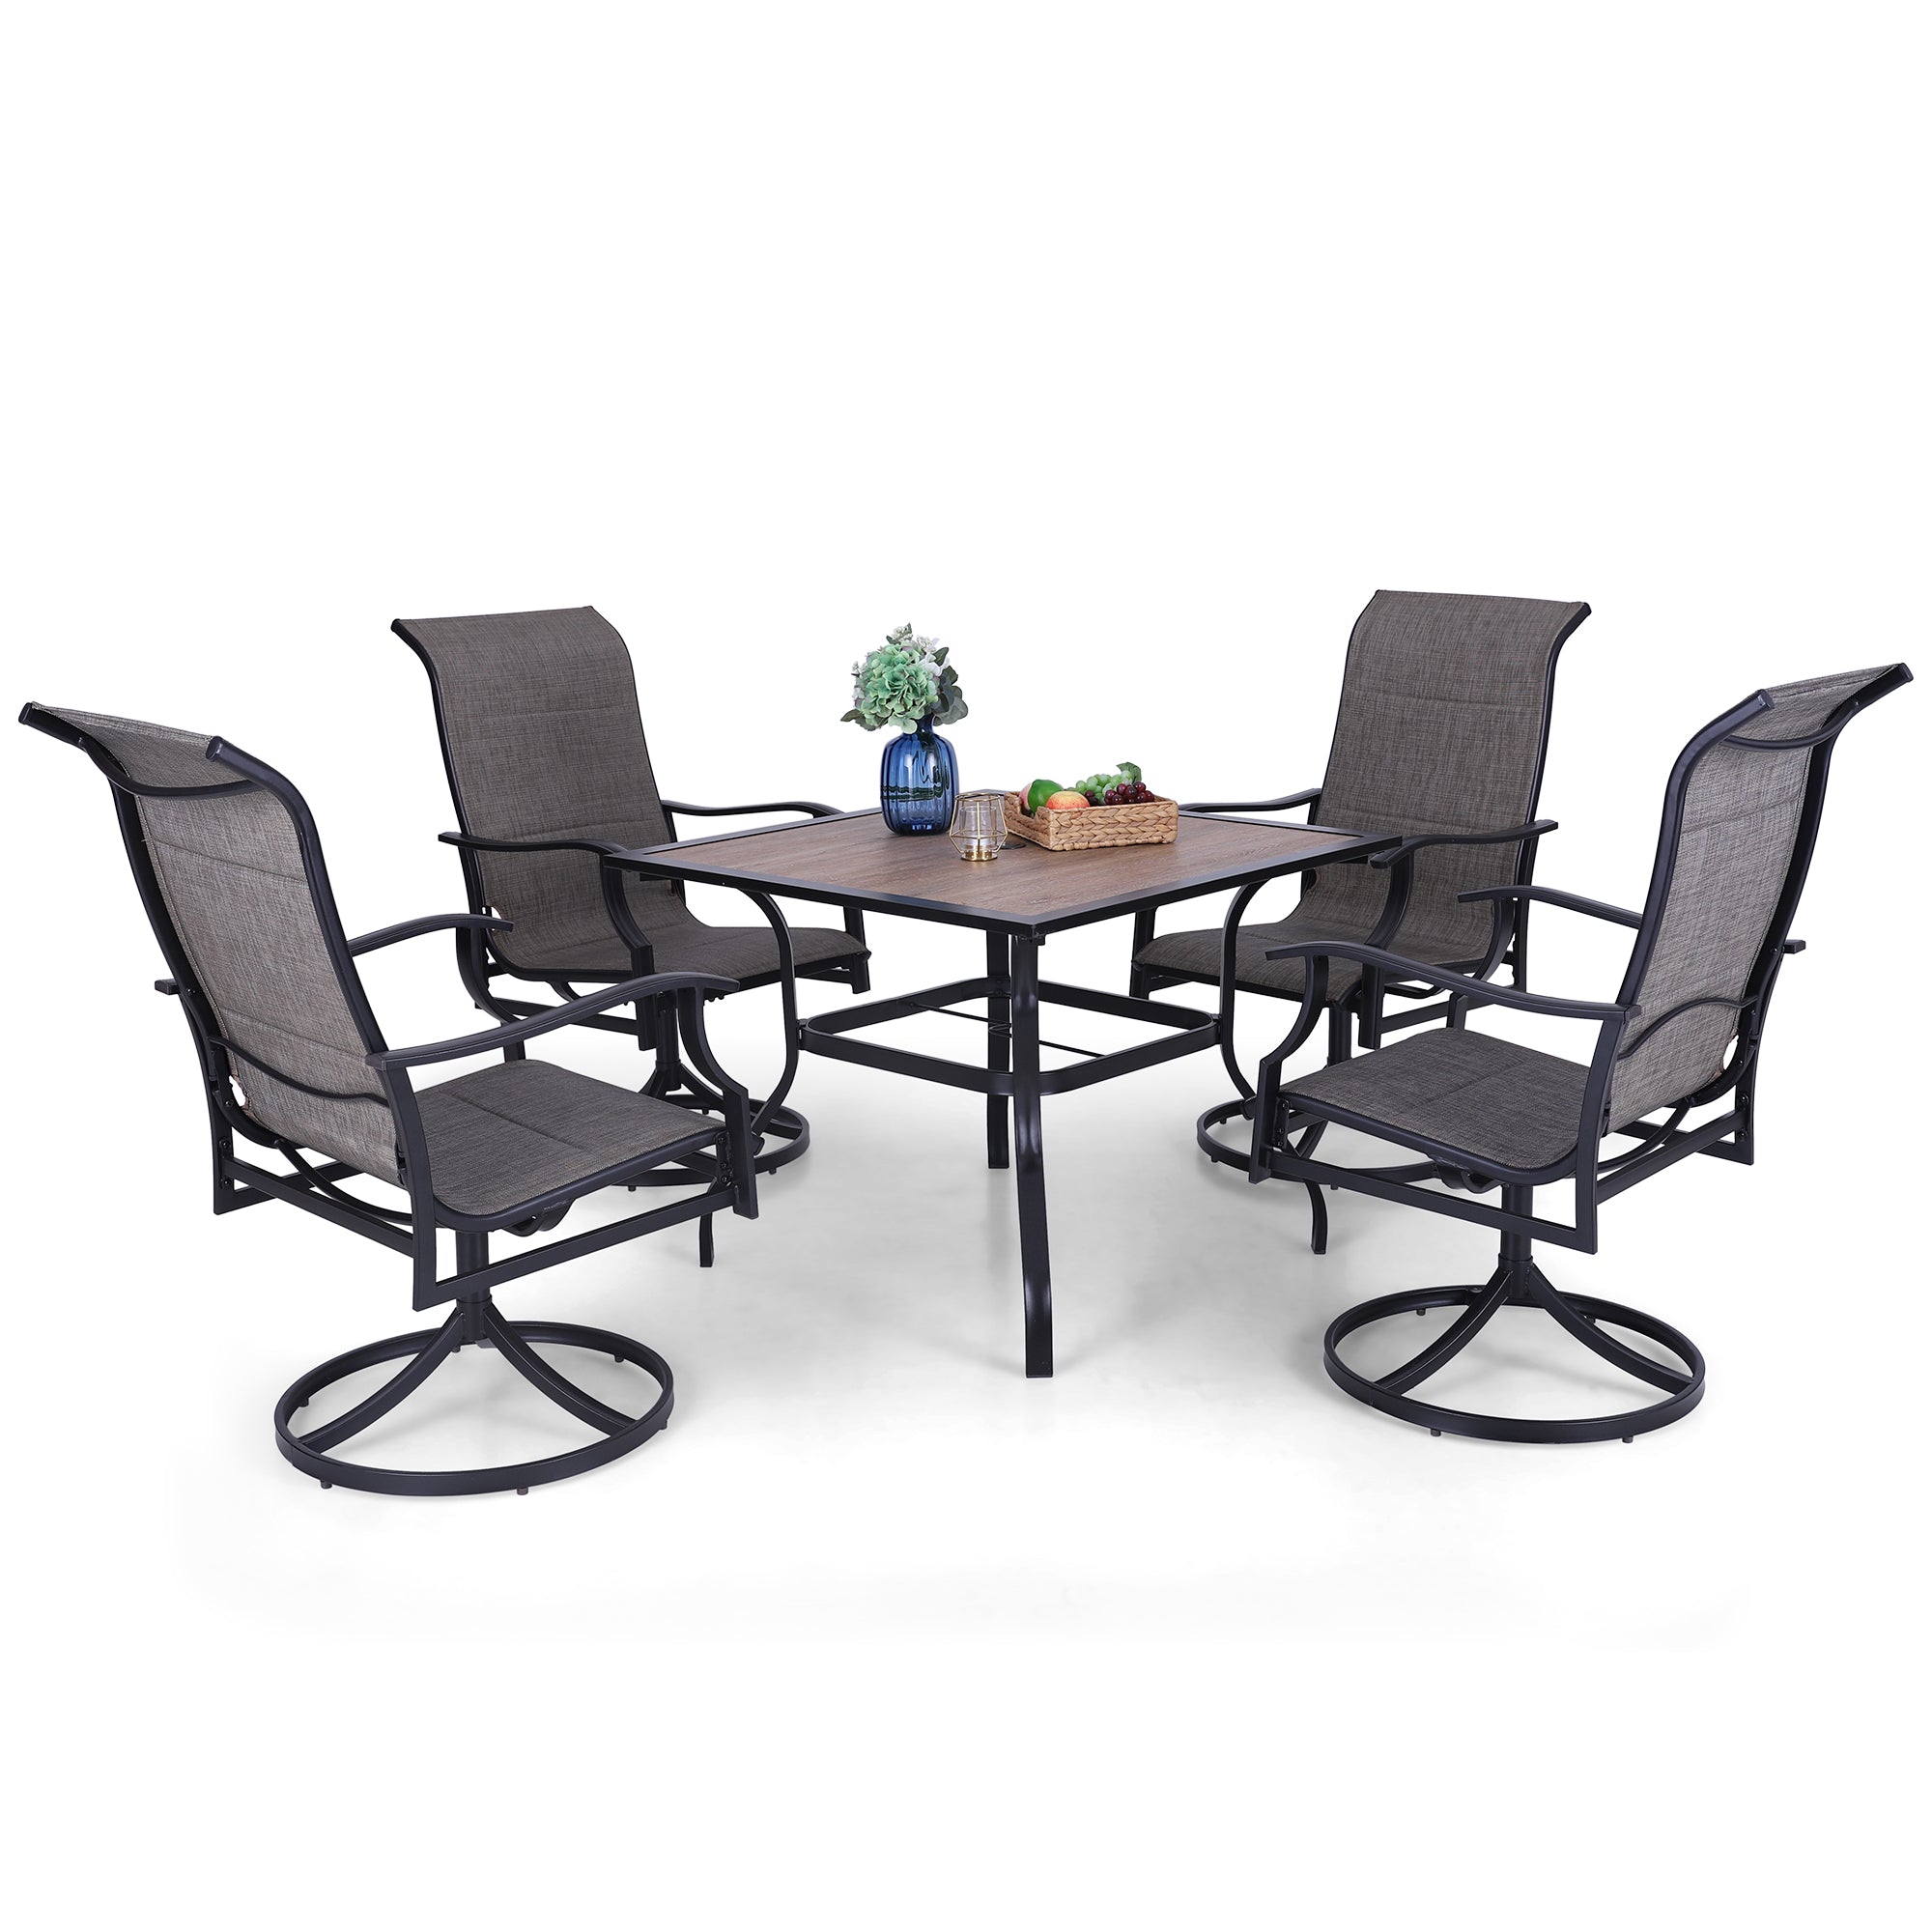 PHI VILLA Wood-look Table & 4 Textilene Swivel Chairs5-Piece Outdoor Patio Dining Set